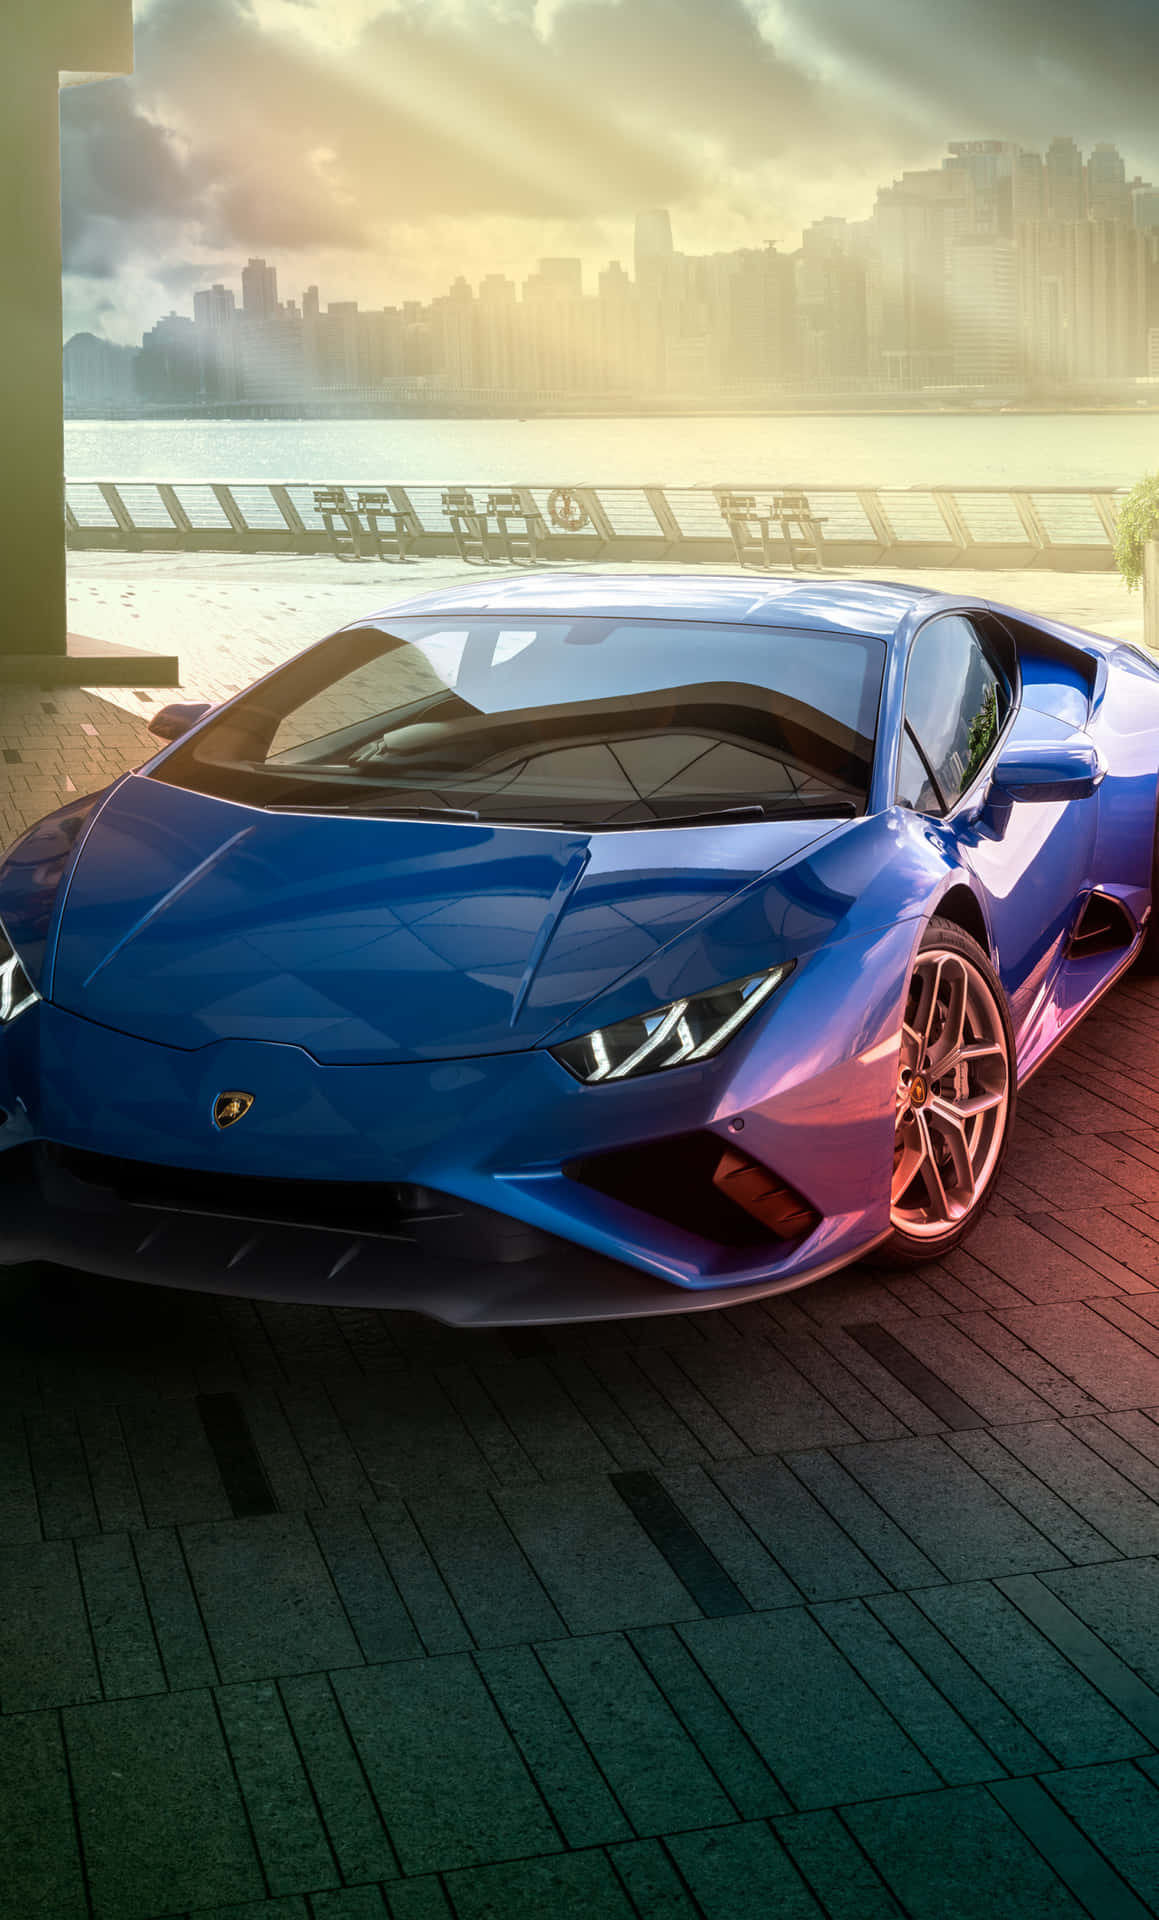 "Making a Powerful Statement with a Blue Lamborghini iPhone" Wallpaper